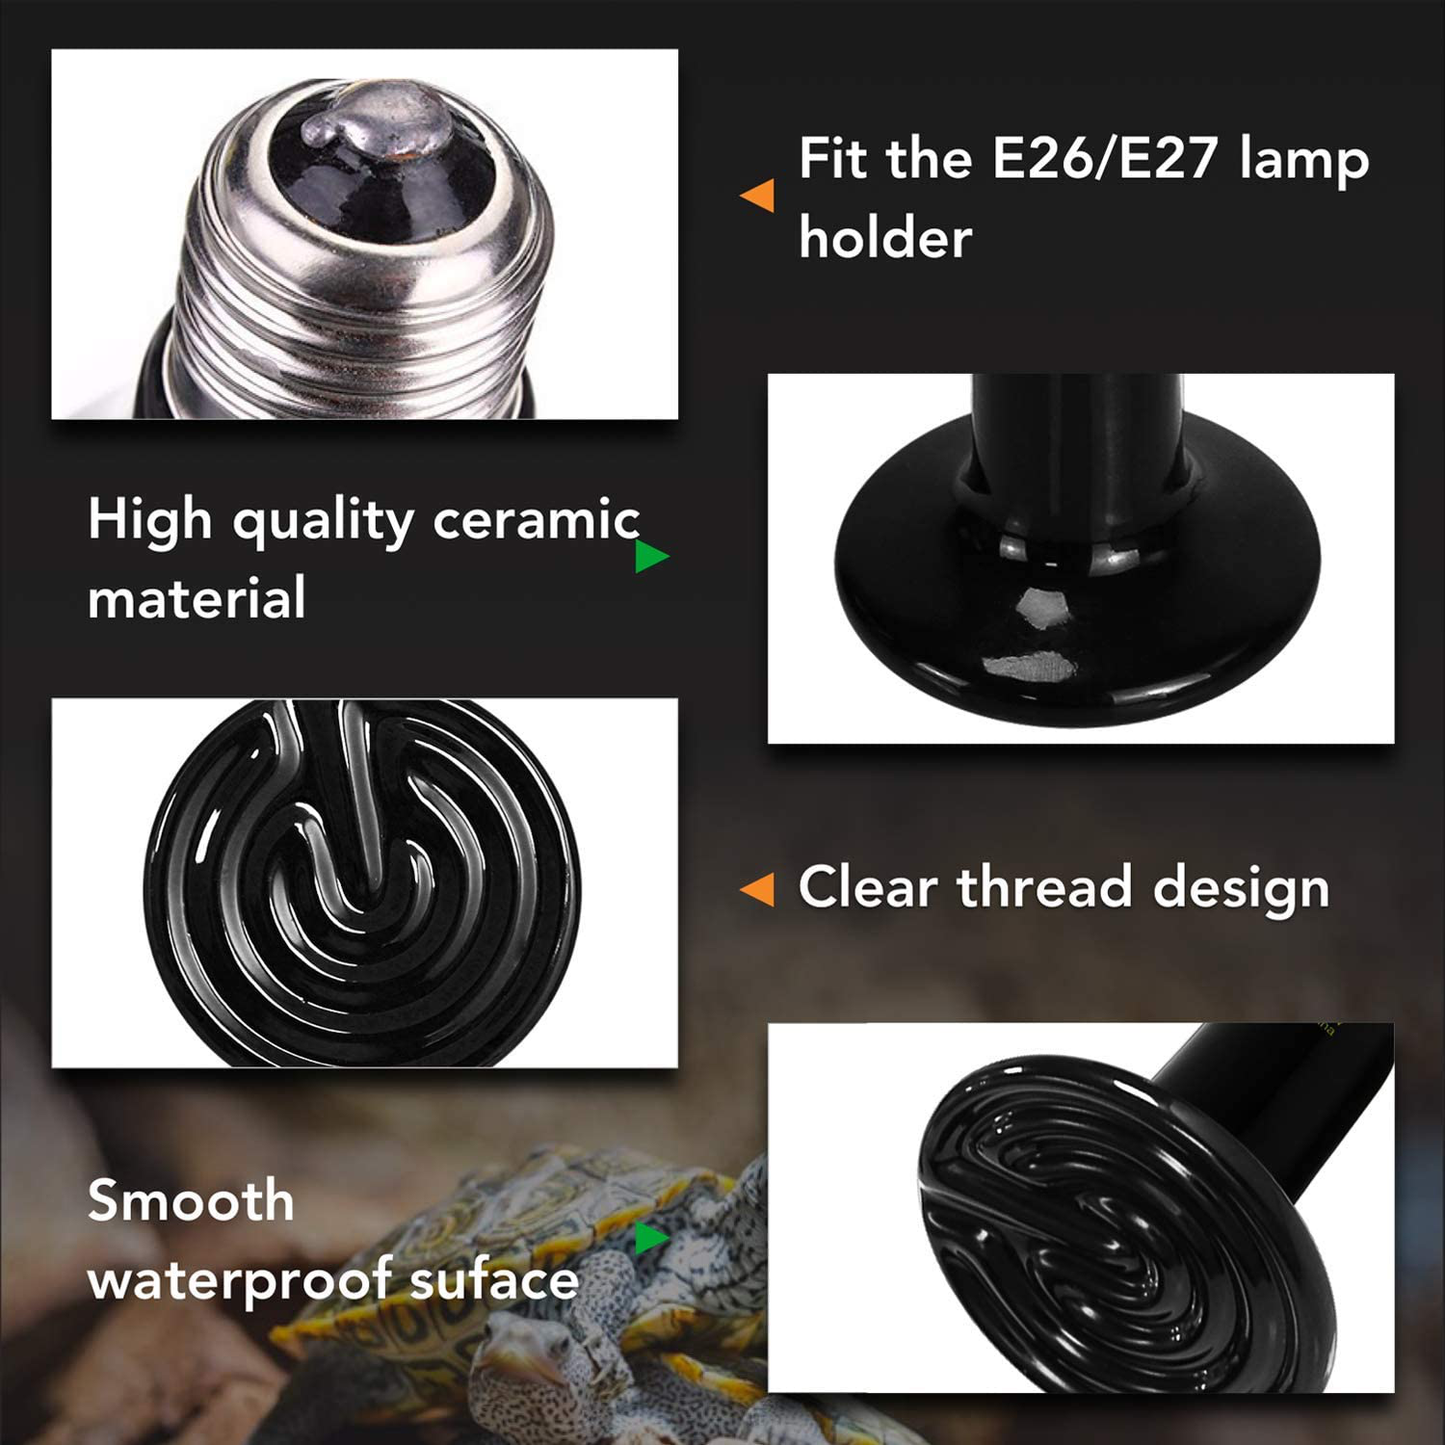 Simple Deluxe 150W Ceramic Heat Emitter Reptile Heat Lamp Bulb No Light Emitting Brooder Coop Heater for Amphibian Pet & Incubating Chicken, 1 Pack/ 2 Pack with Thermometer, Black & White